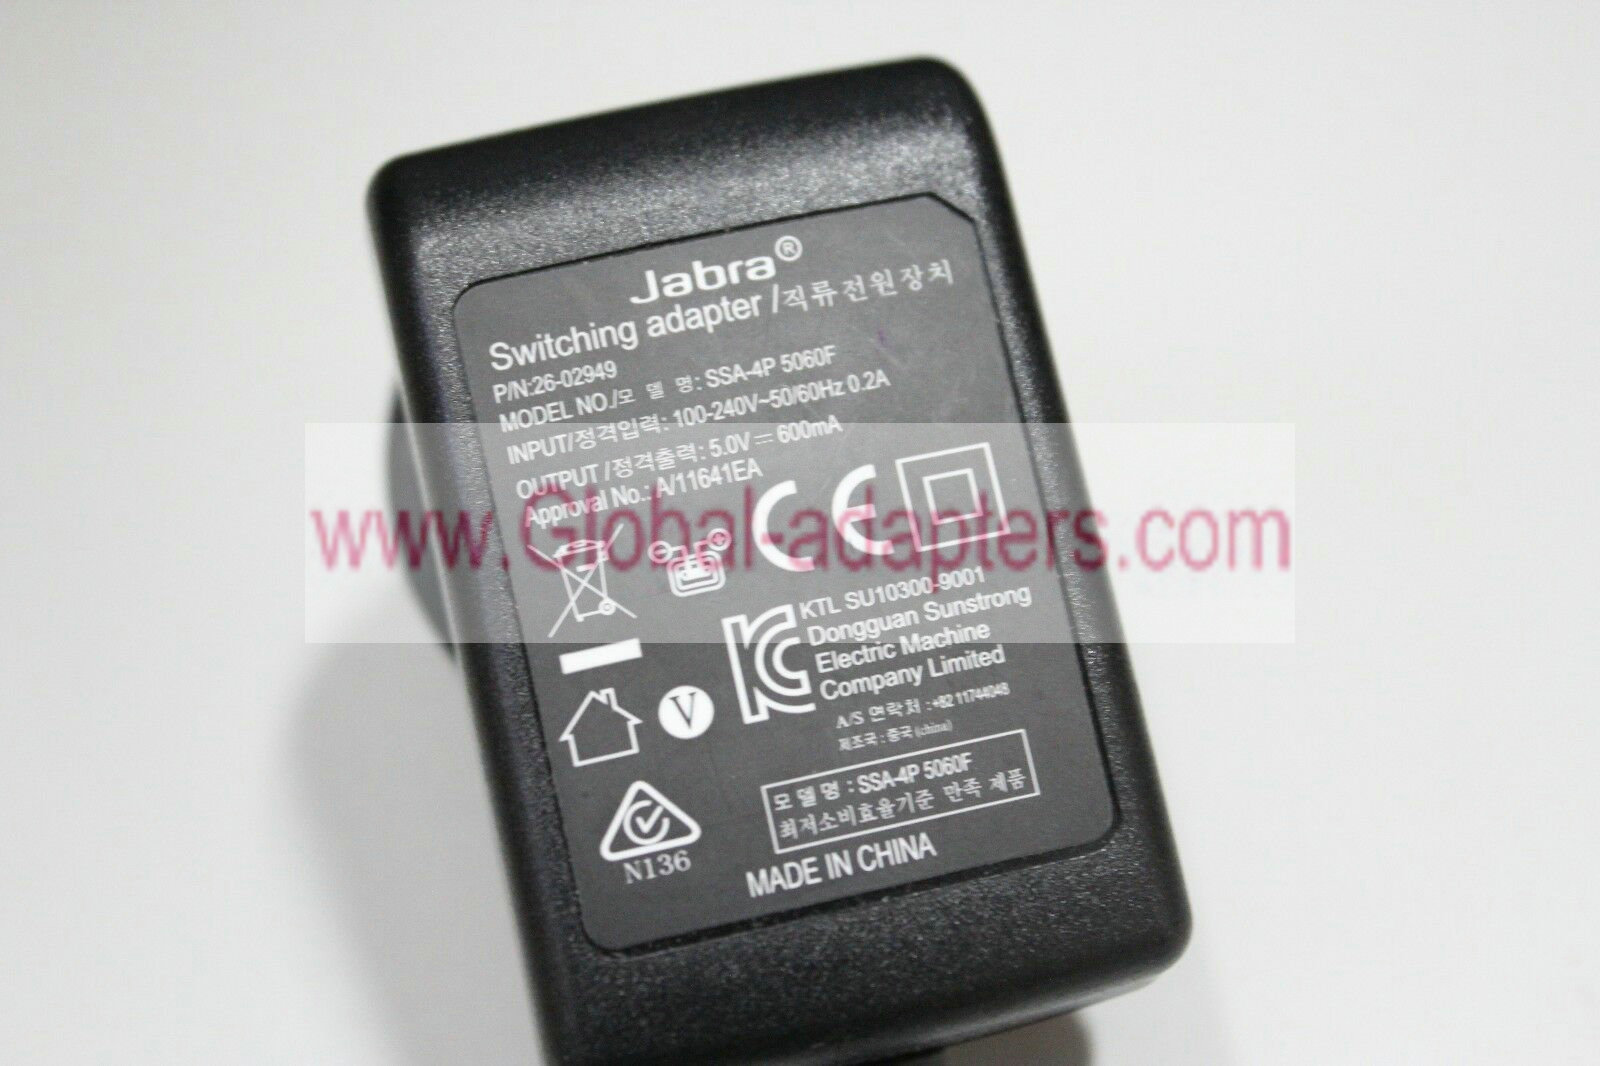 JABRA SSA-4P 5060F SWITCHING ADAPTER 5V 0.6A 26-02949 power charger